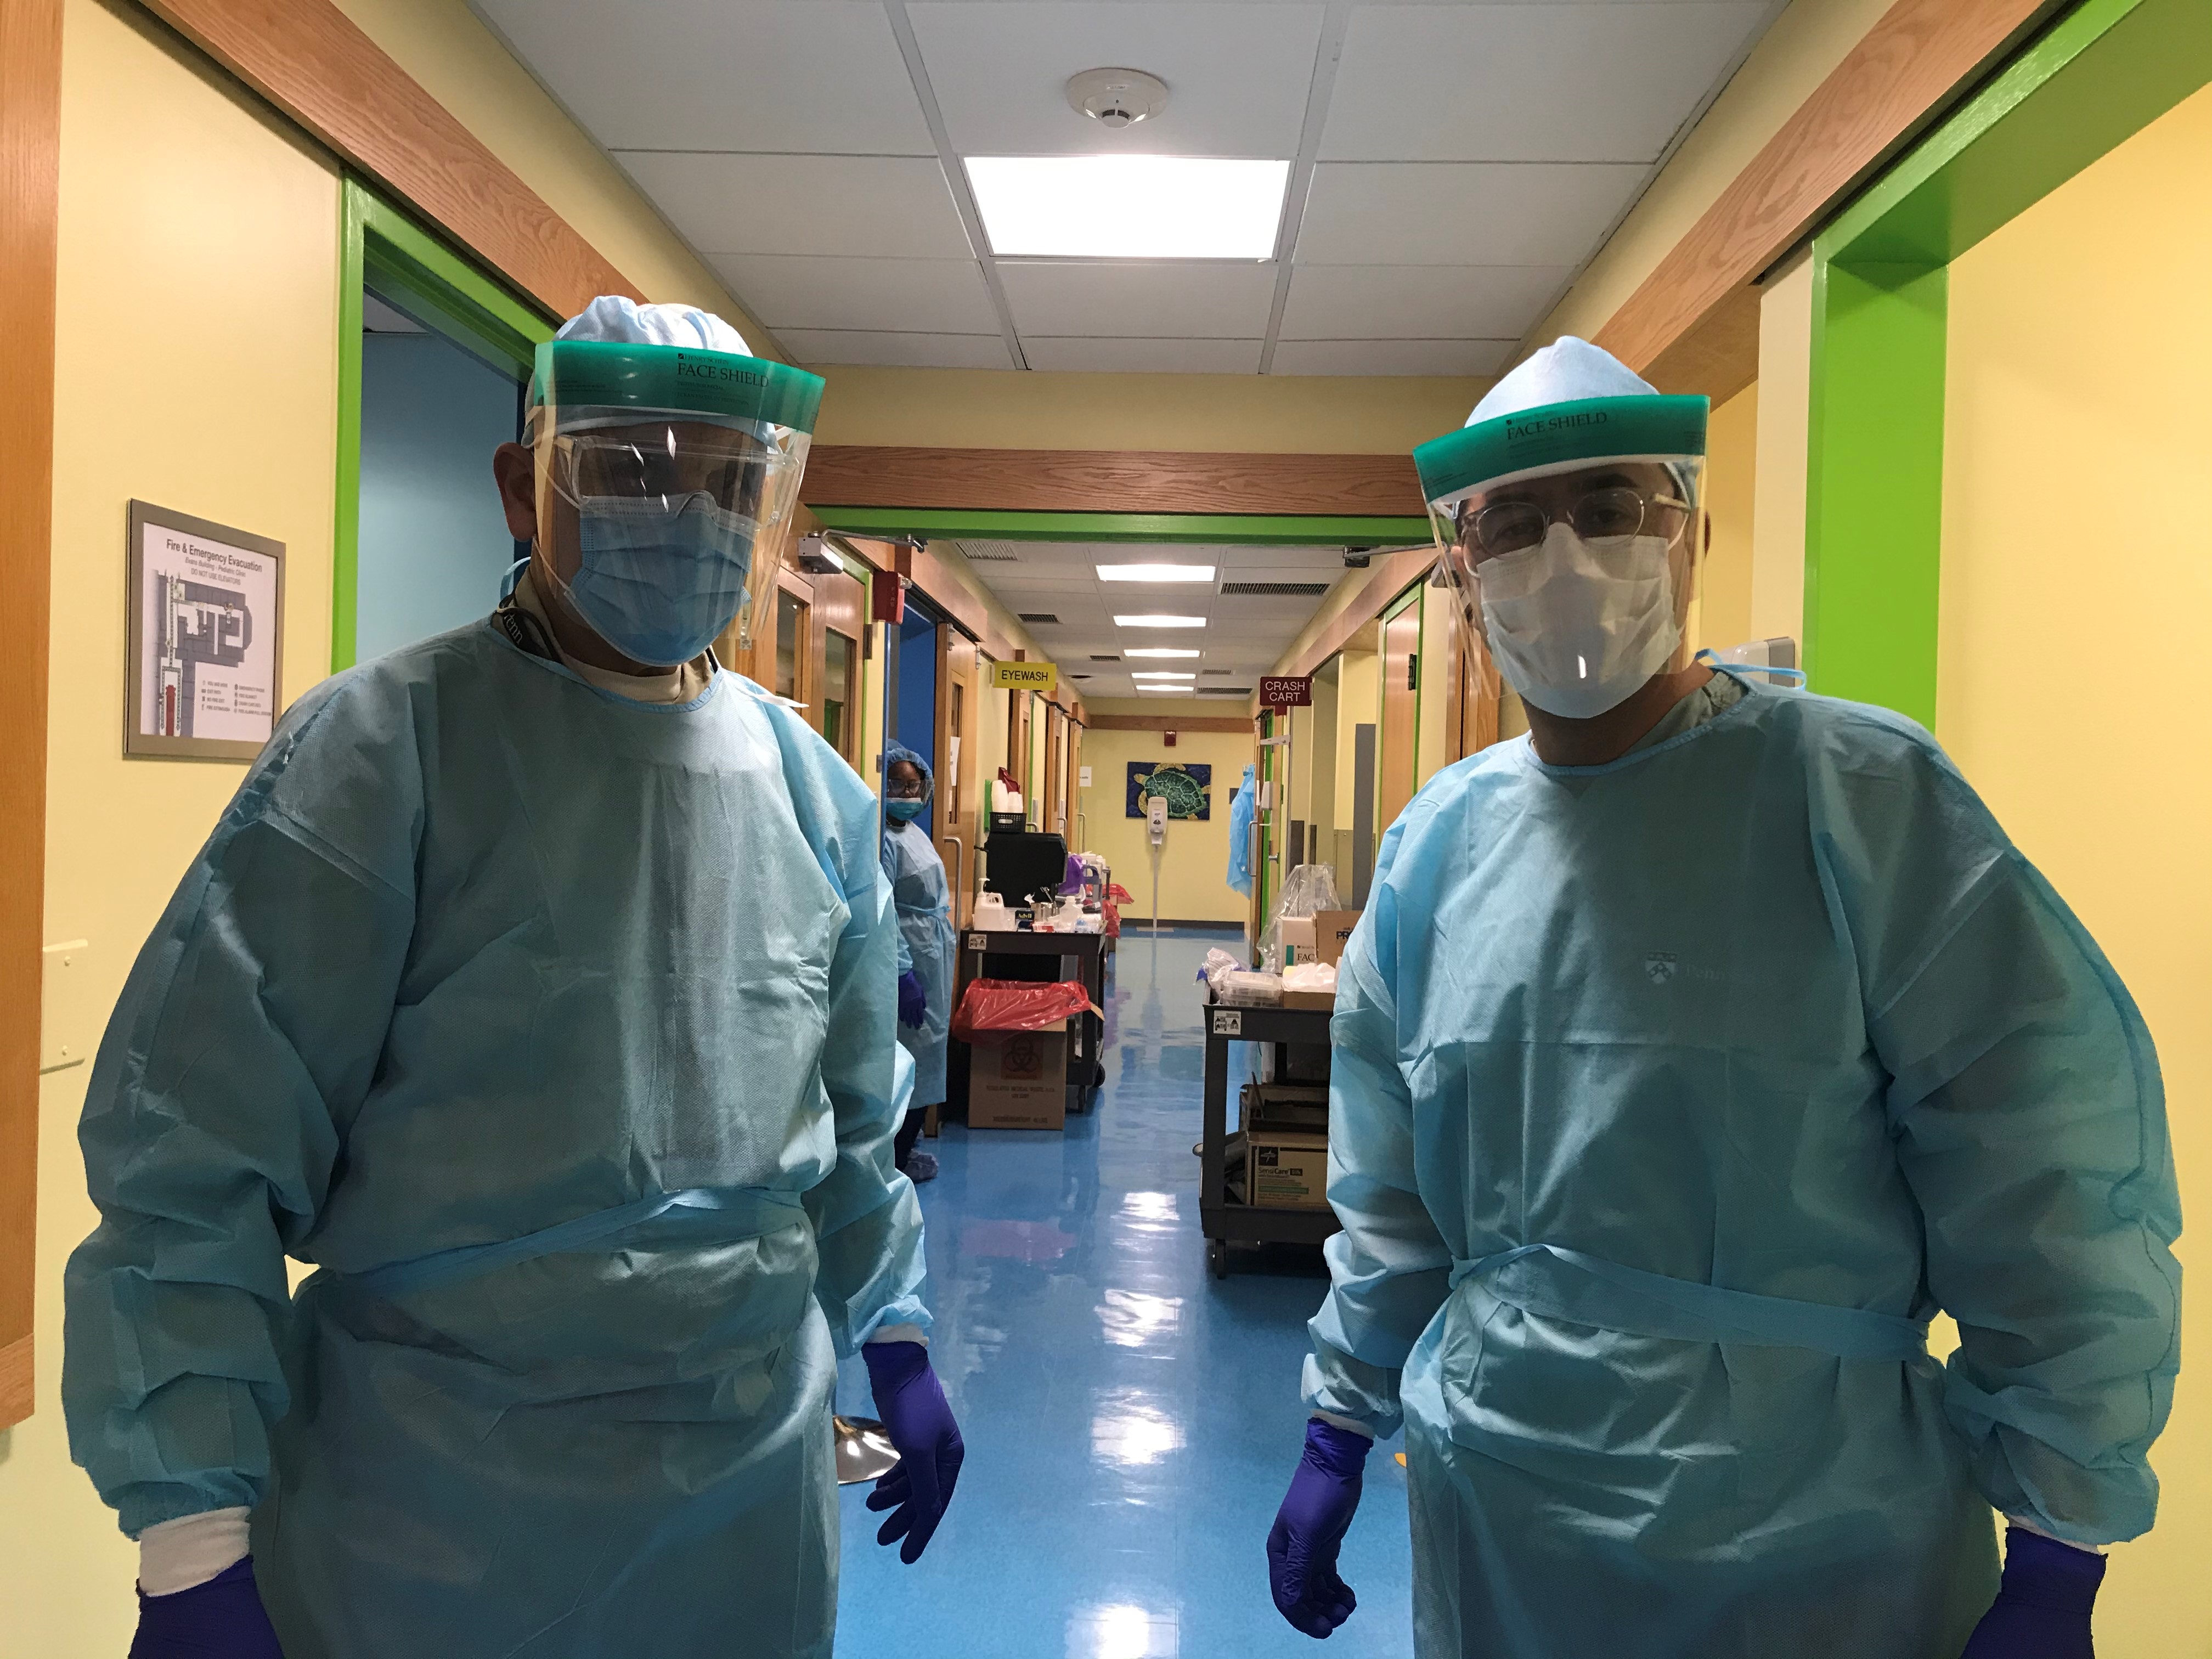 Dentists in protective equipment